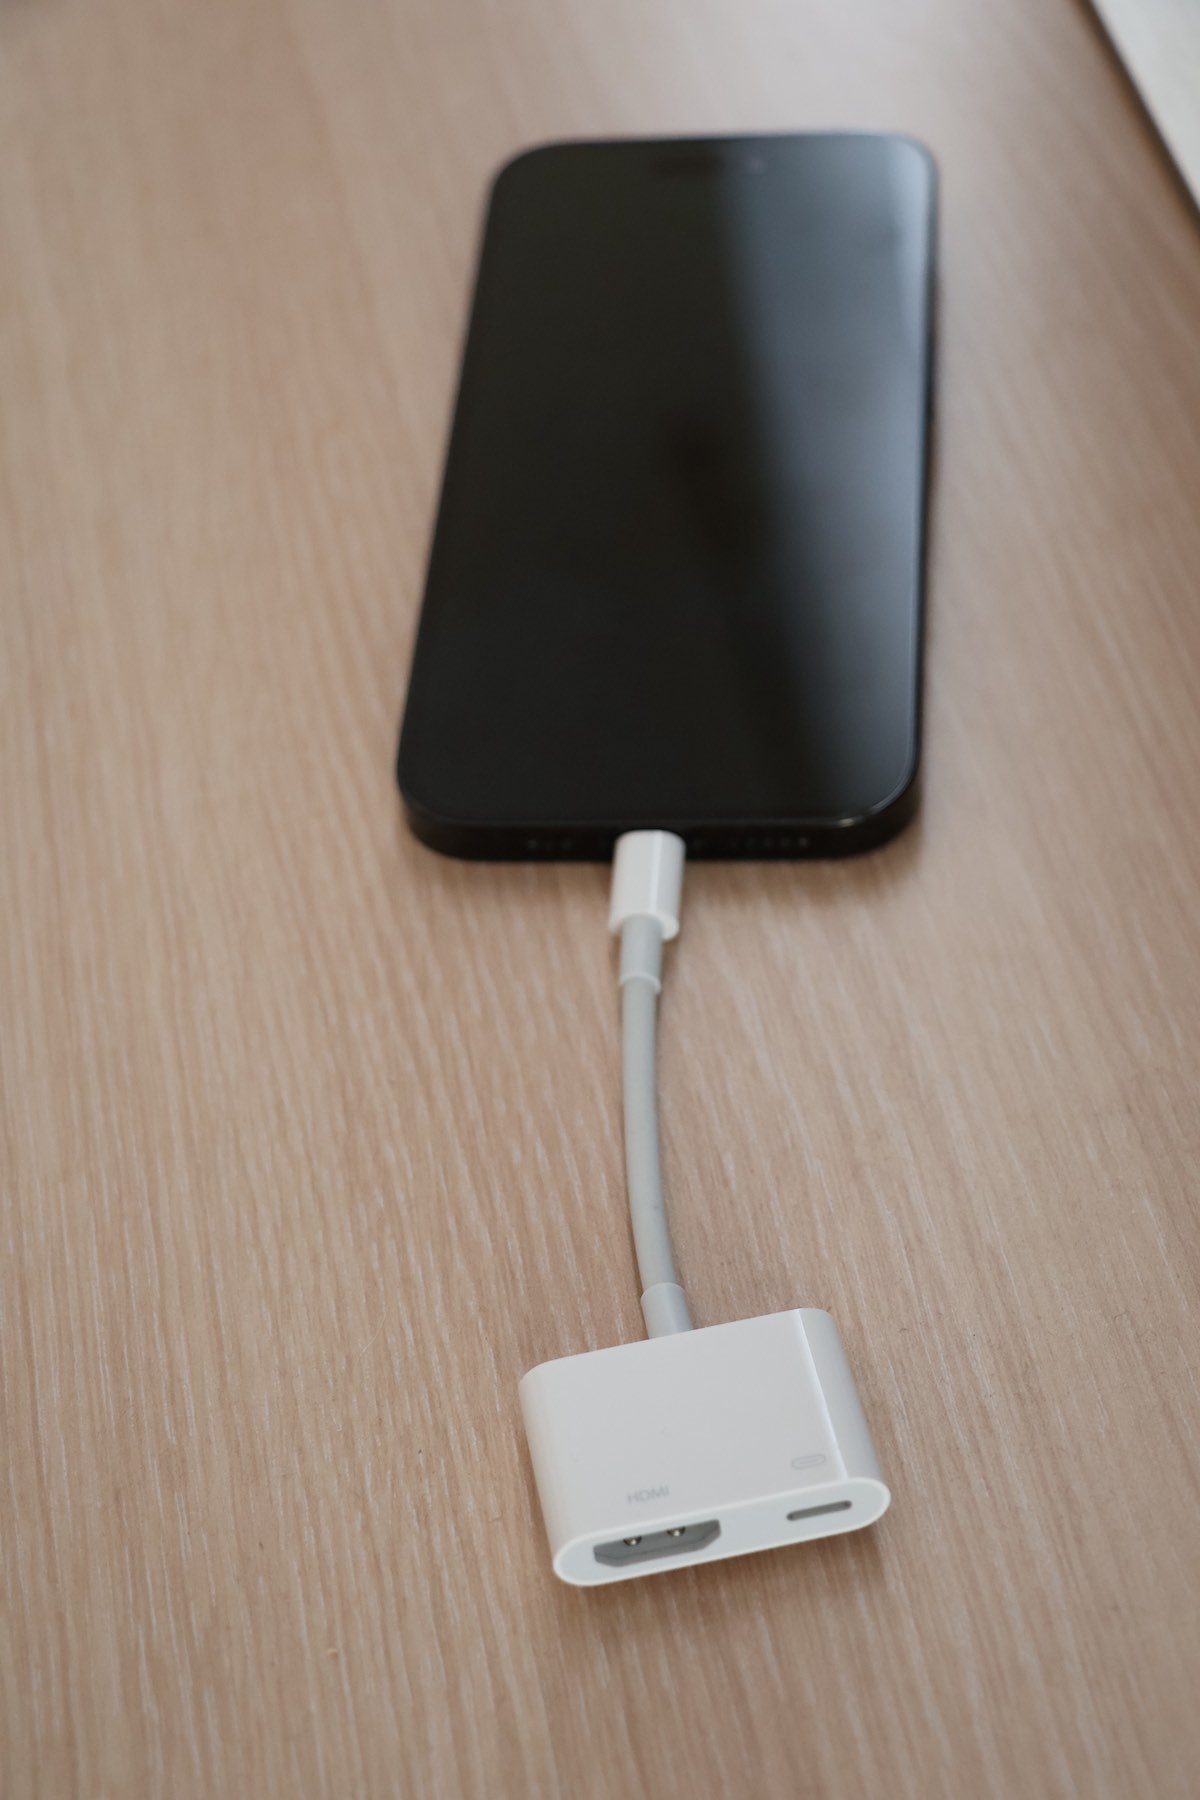 Connect HDMI adapter to iPhone